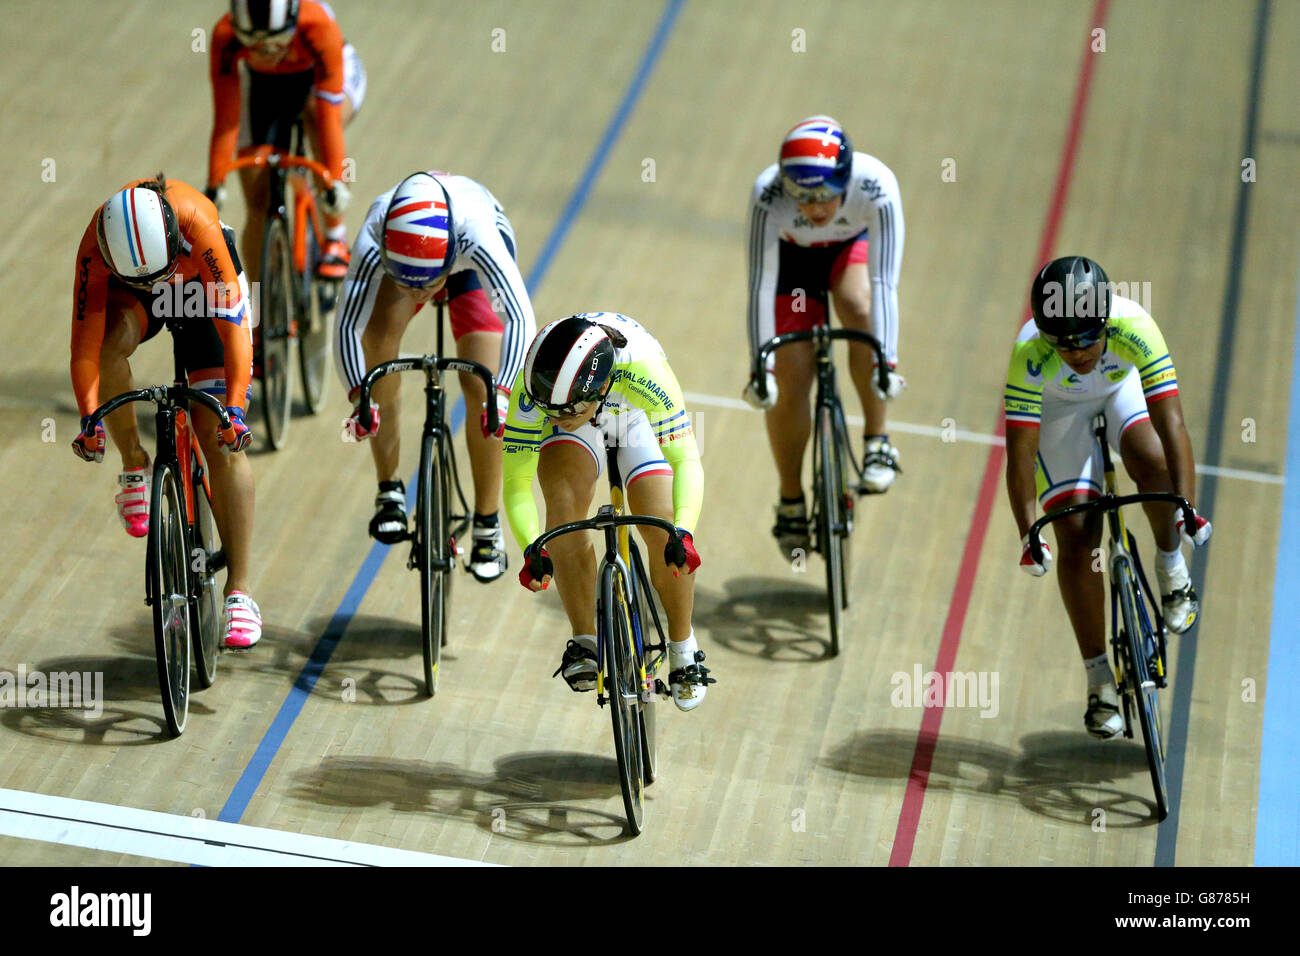 France's Sandie Clair (centre) wins the first round of the Women's Keirin during day three of the Revolution Series at Derby Arena. PRESS ASSOCIATION Photo. Picture date: Sunday August 16, 2015. See PA story CYCLING Derby. Photo credit should read: Tim Goode/PA Wire Stock Photo